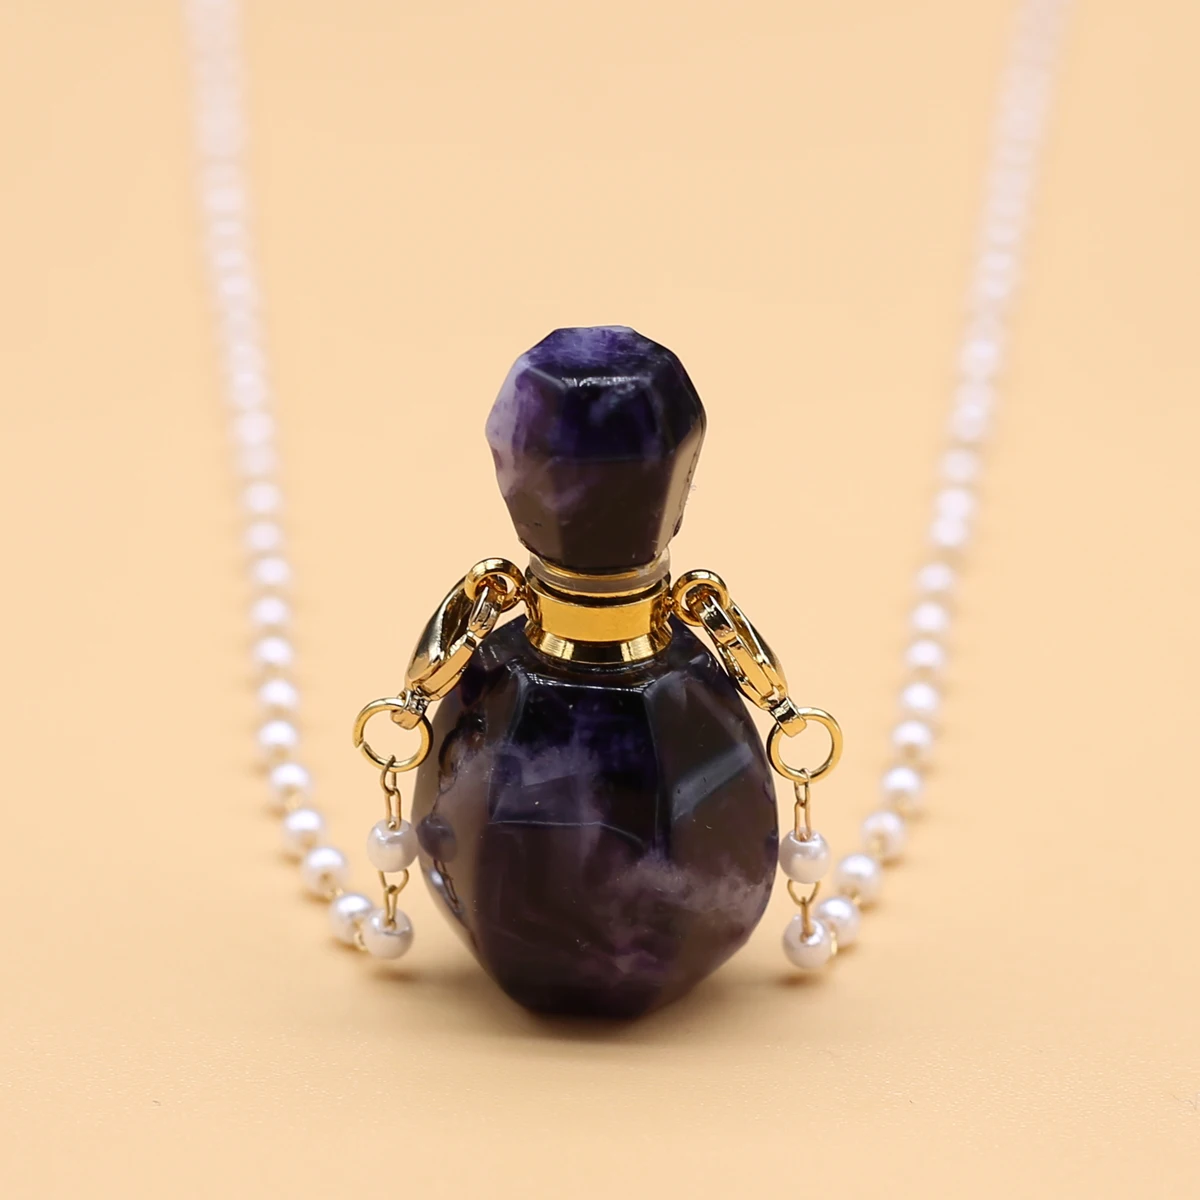 

Natural Stones Fluorite Perfume Bottle Pendant Necklace Charms Pearls Chain Necklaces for Women Jewelry Handmade Crafts 16x33mm